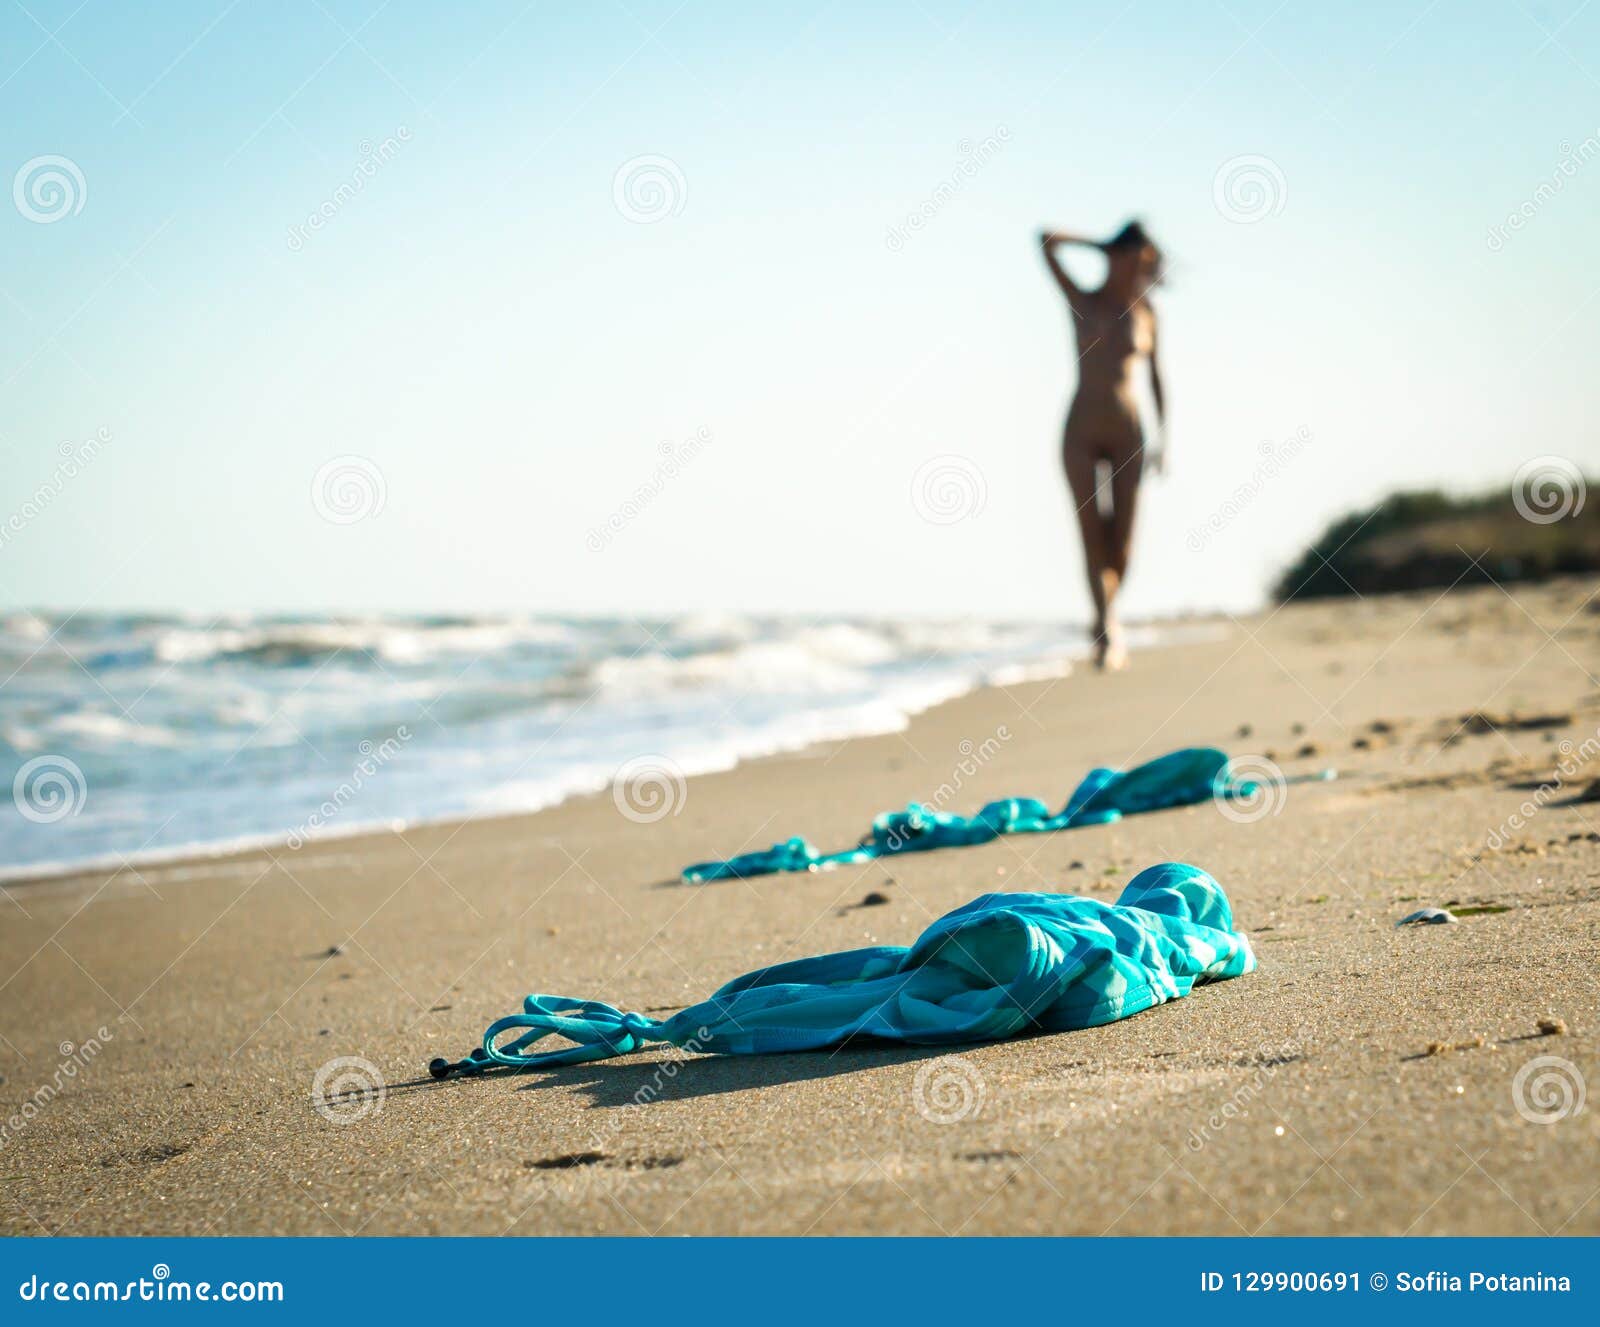 Swimsuit in the Sand on the Beach Near the Sea Surf on the Background of a Naked Female Figure and Blue Sky Stock Image